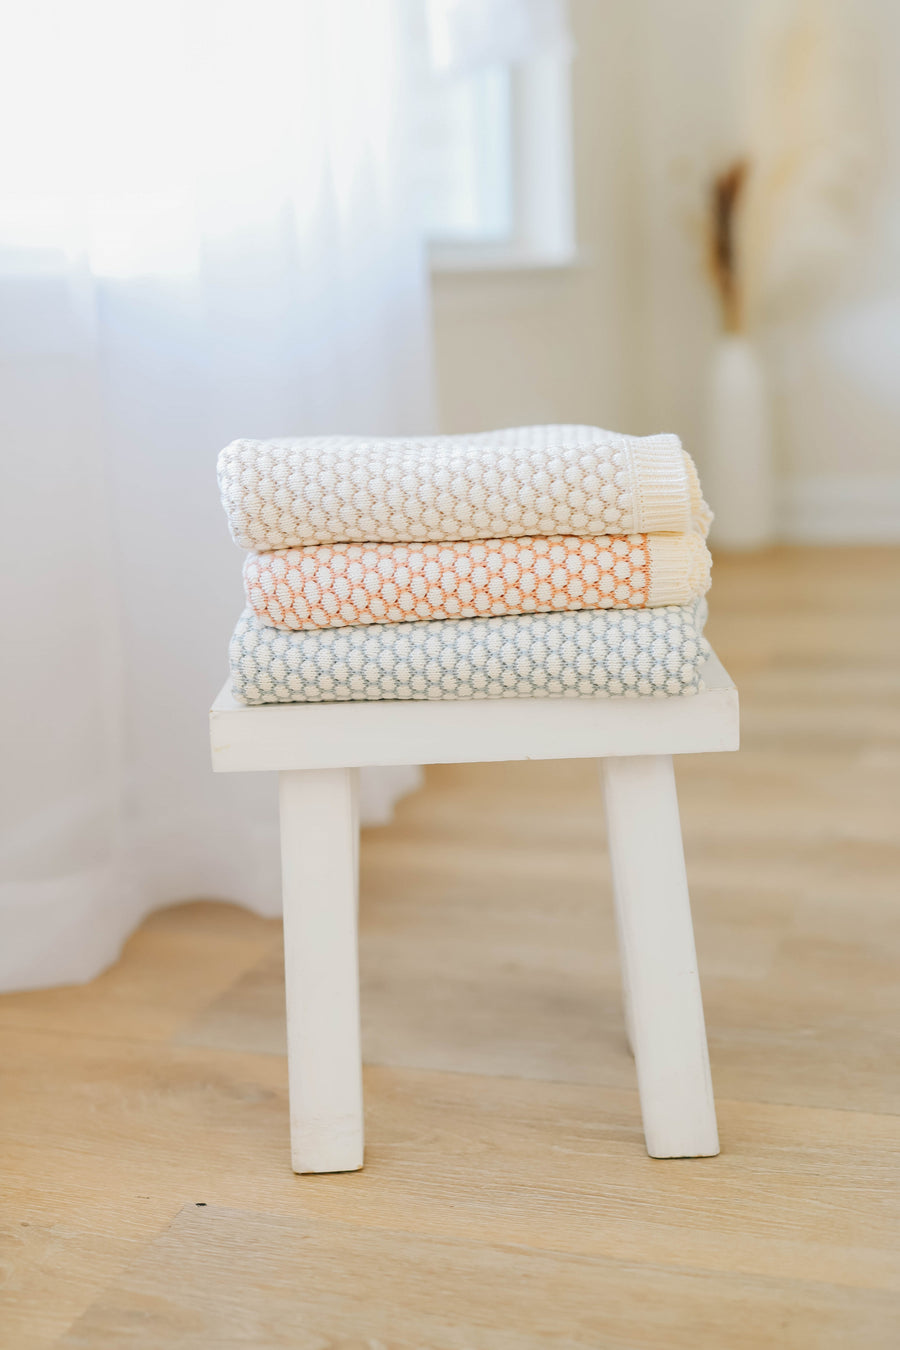 Popcorn Knit Collection - Blankets